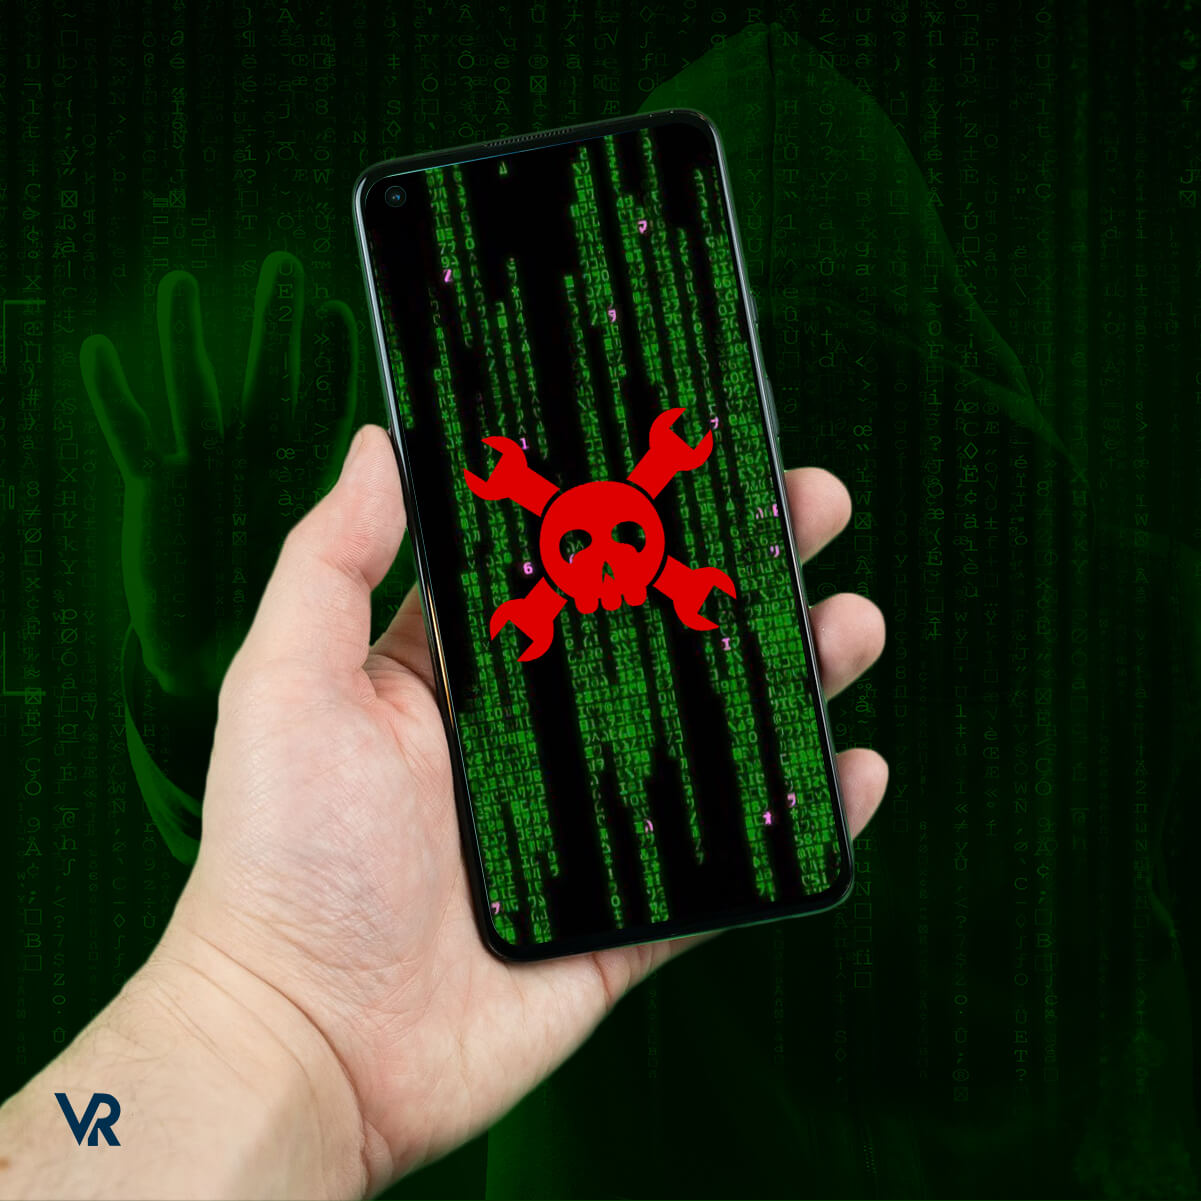 More than 1,000 Android phones found infected by creepy new spyware (1)